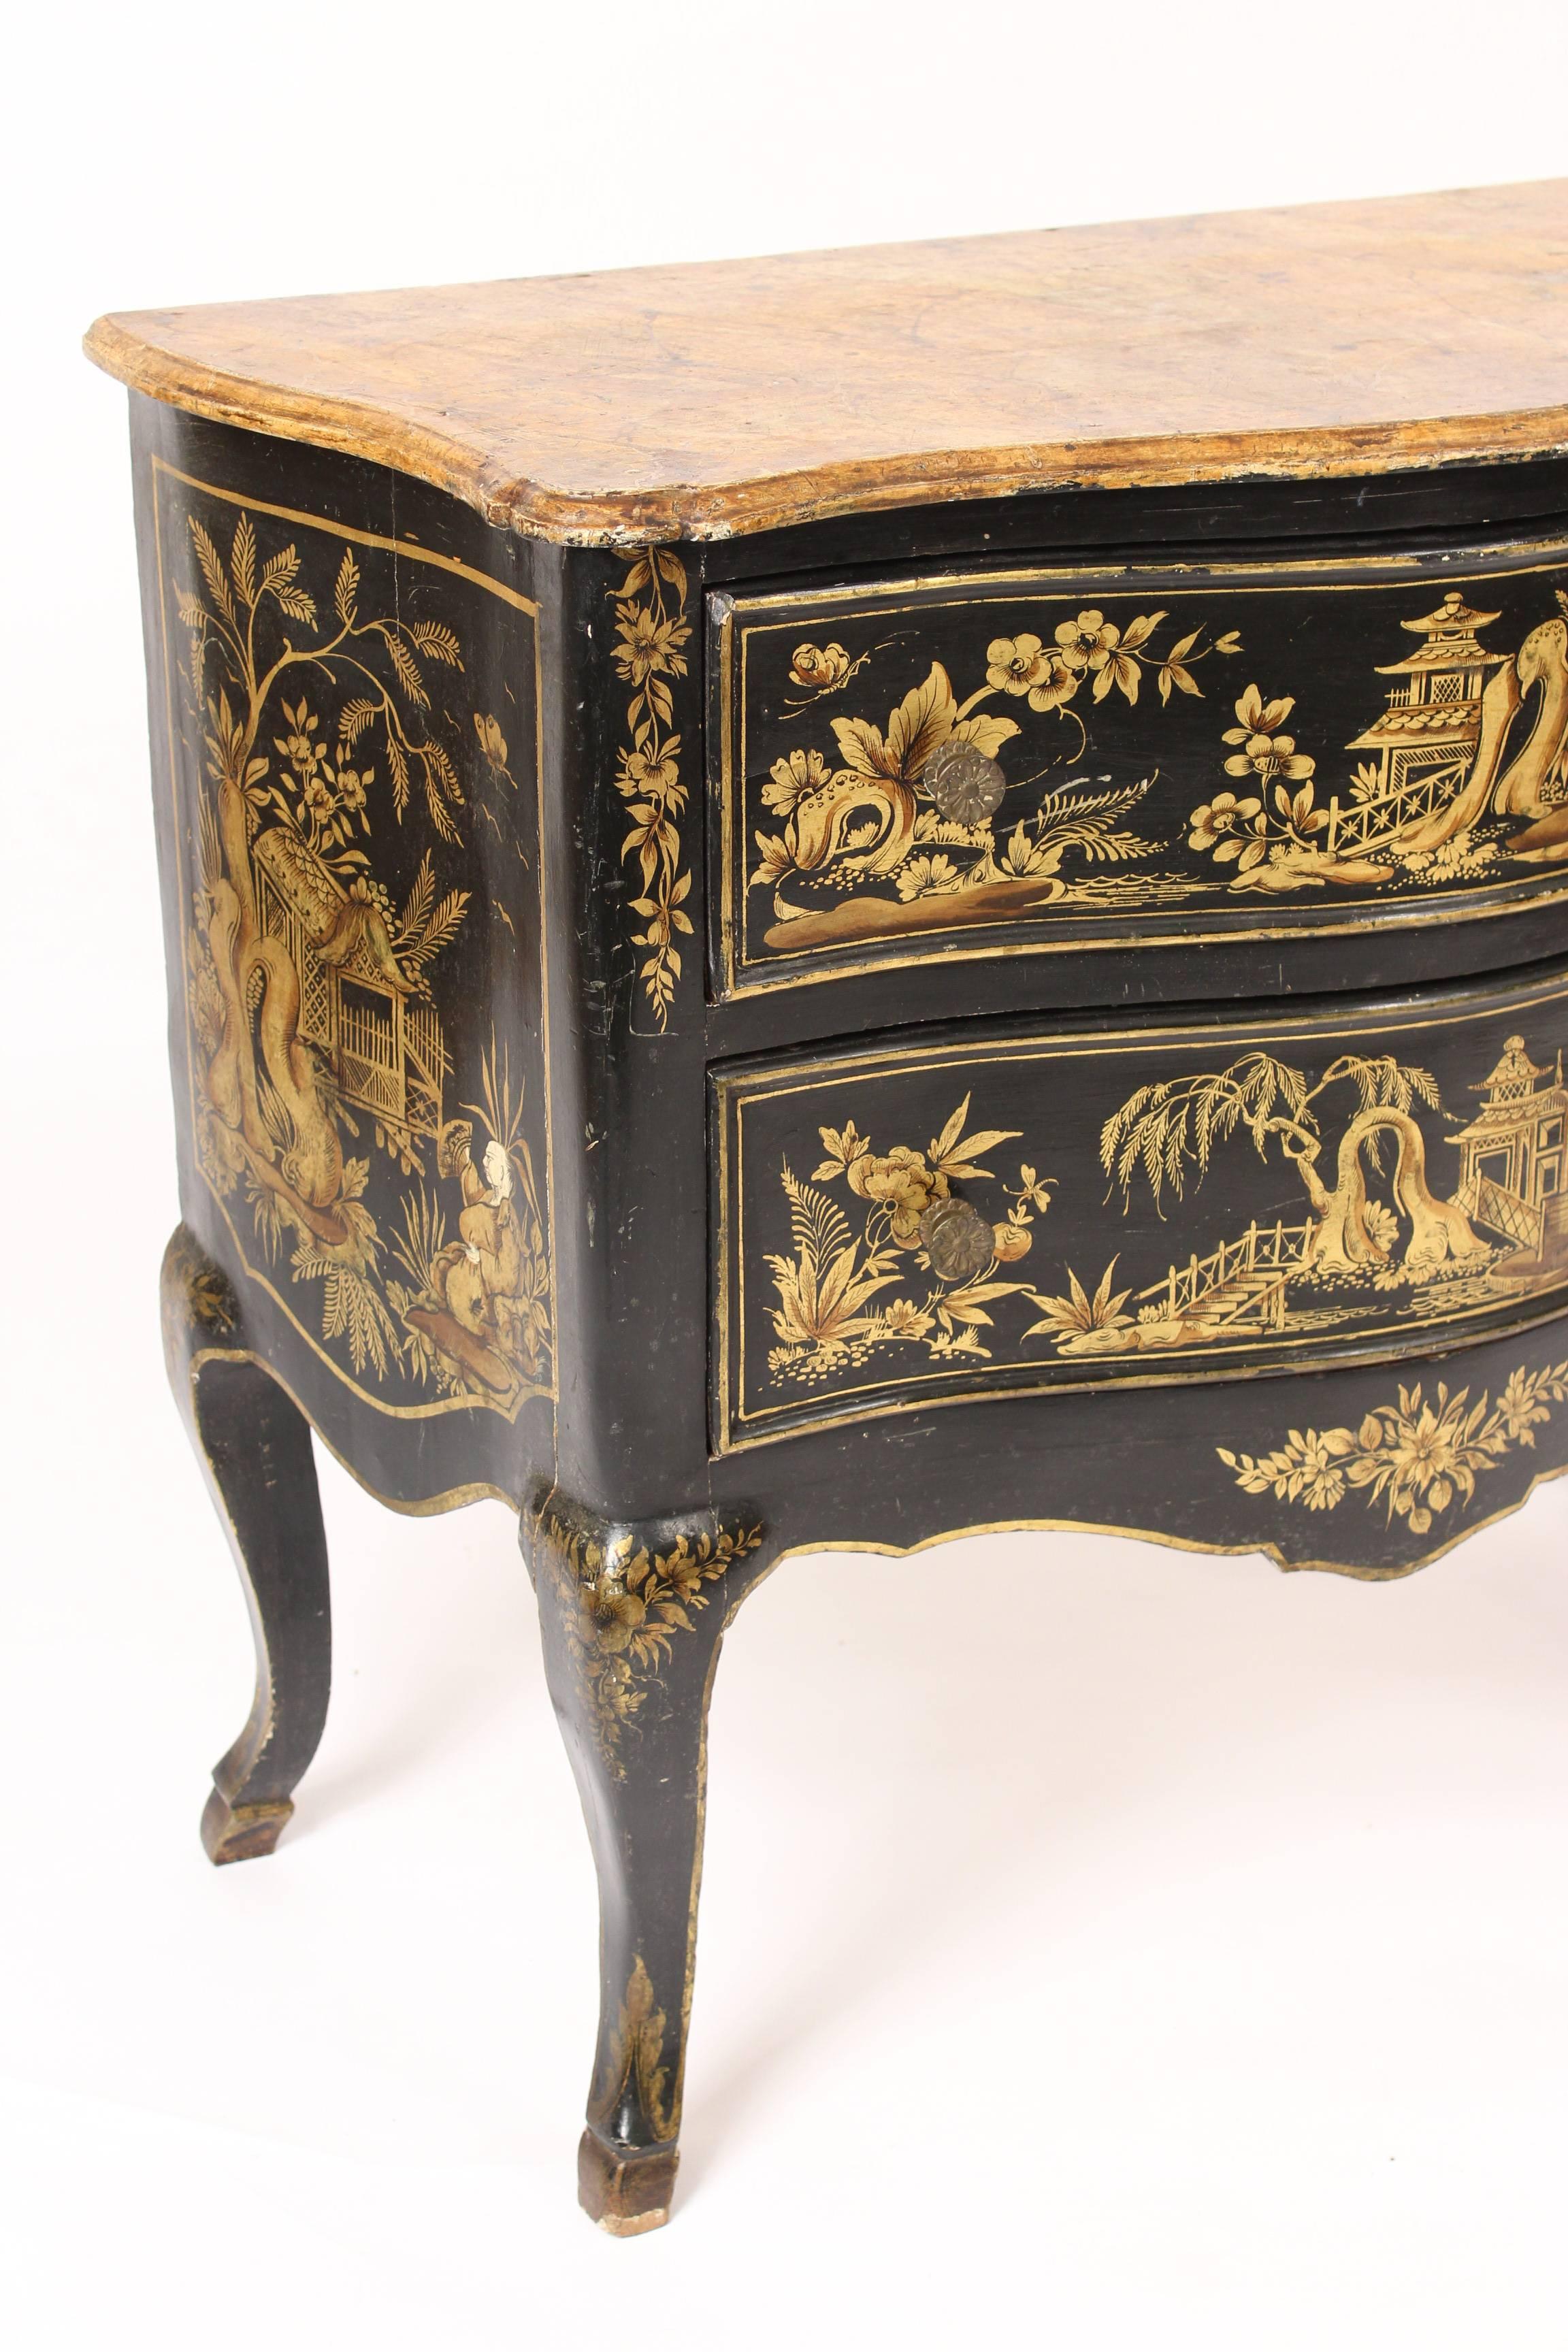 20th Century Italian Louis XV Style Chinoiserie Decorated Chest of Drawers